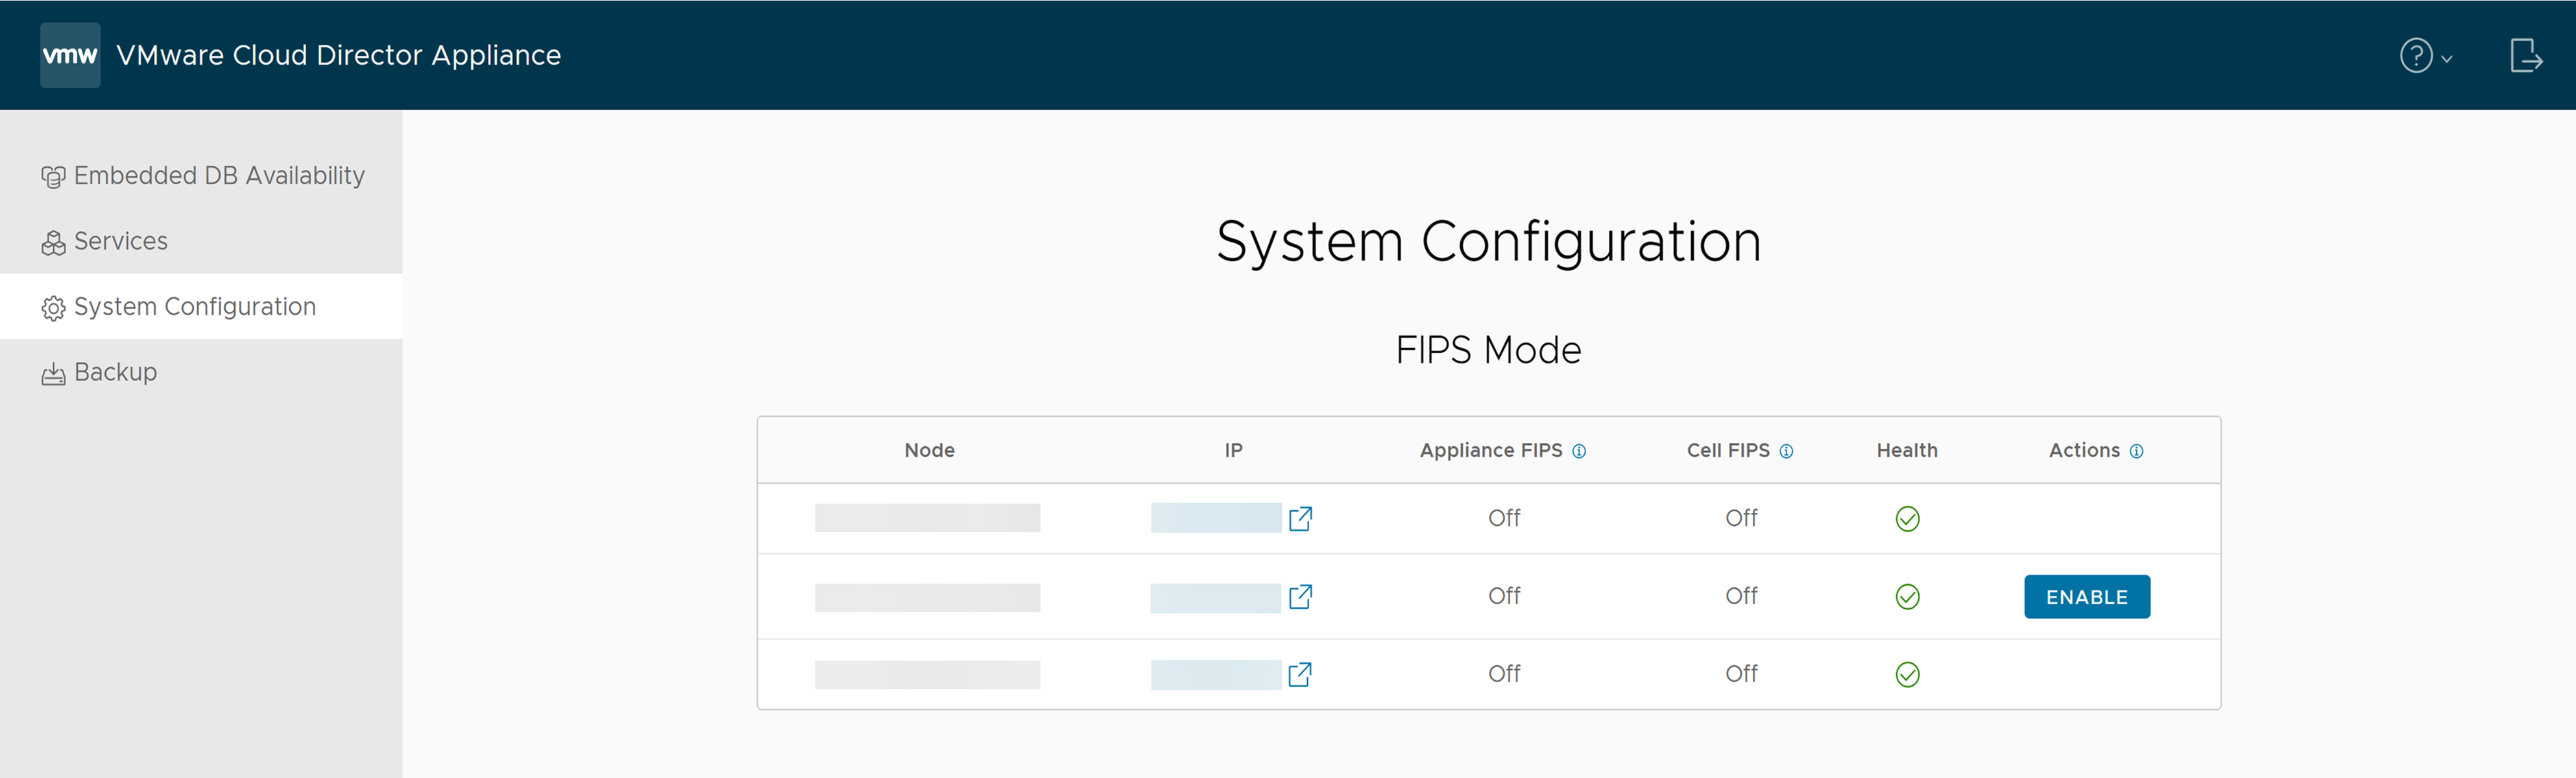 On the System Configuration tab of the VMware Cloud Director appliance management UI, you can find the FIPS mode information.